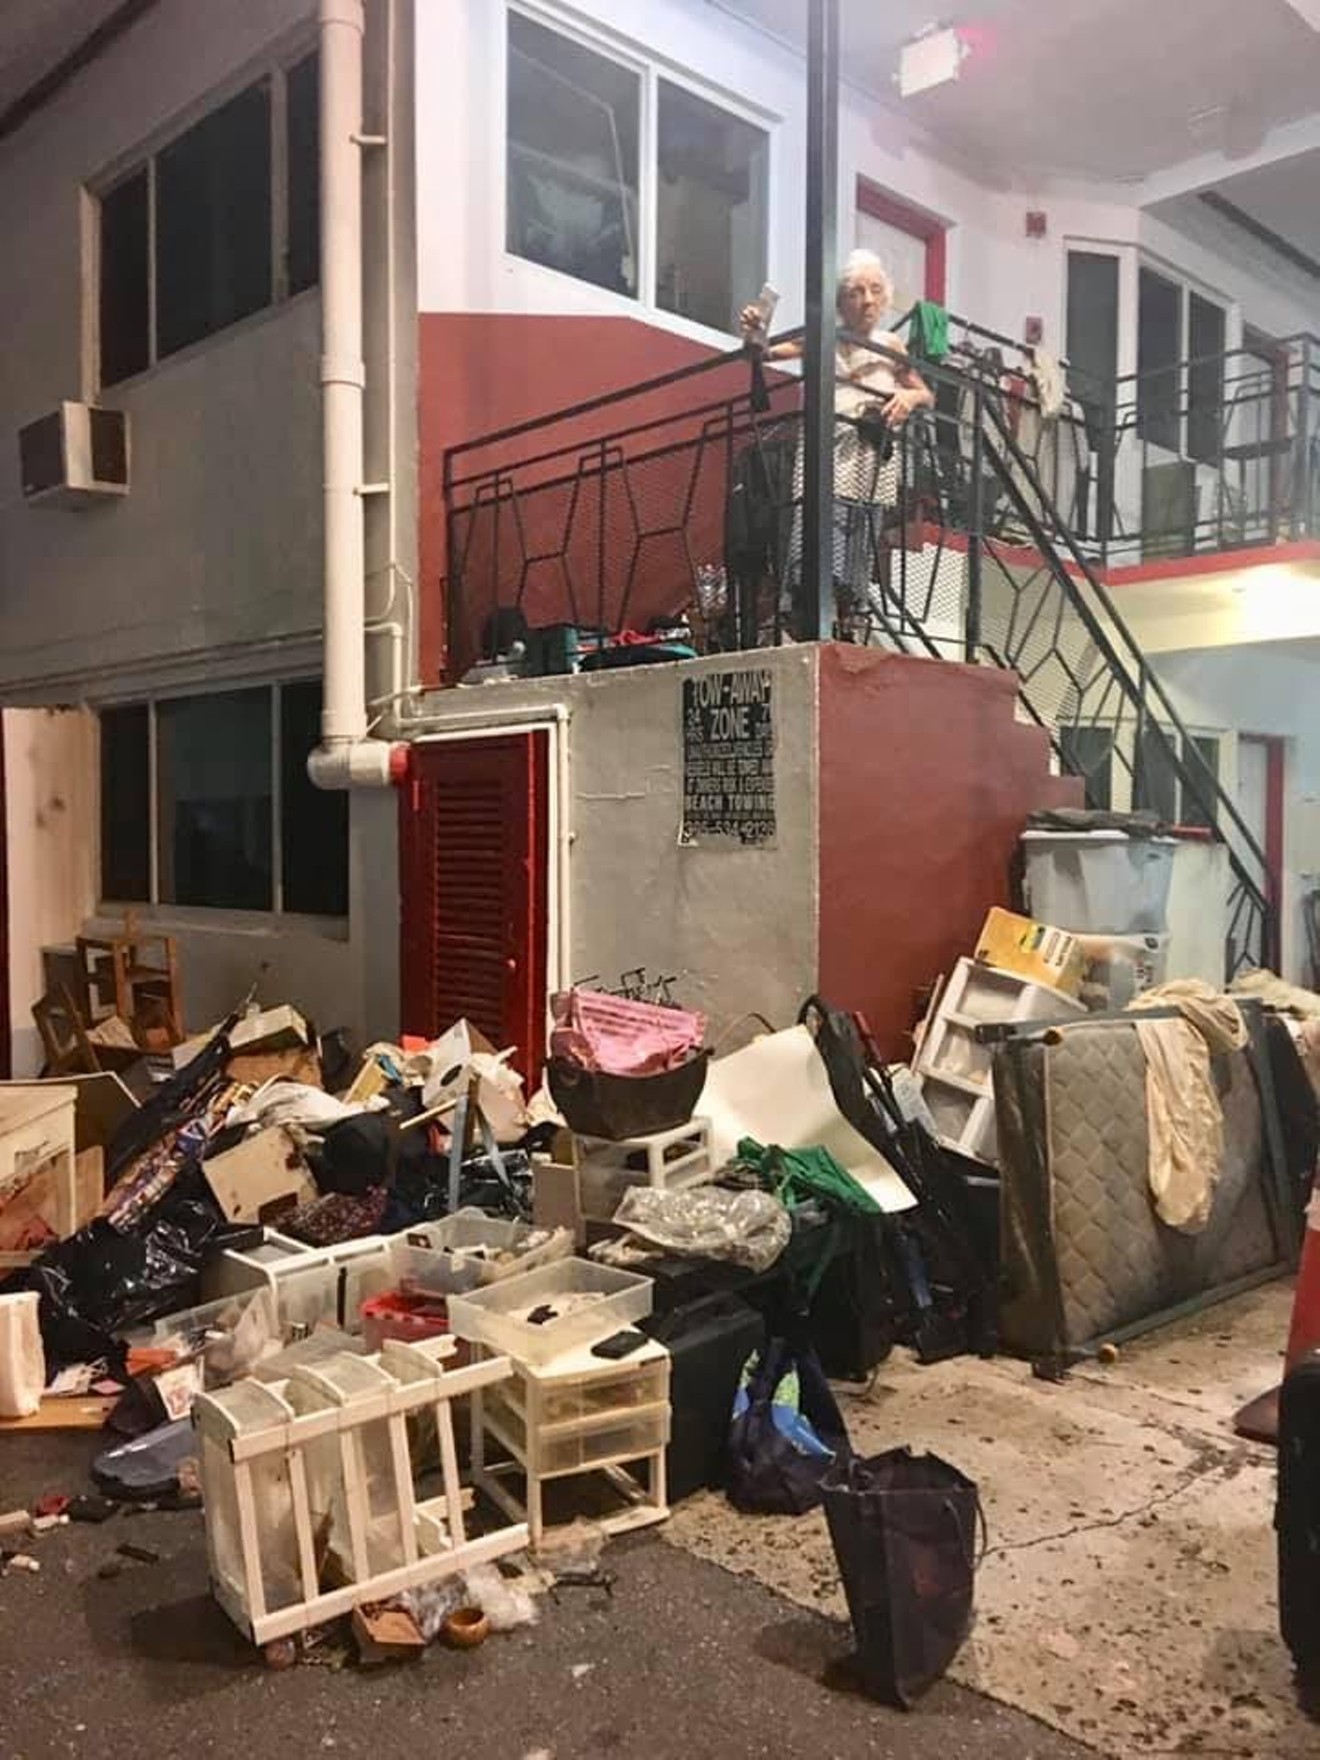 The Miami Beach eviction of Maria Cazañes Friday night has spurred lawmakers to push for legislation that would pause displacement during emergencies such as hurricanes.